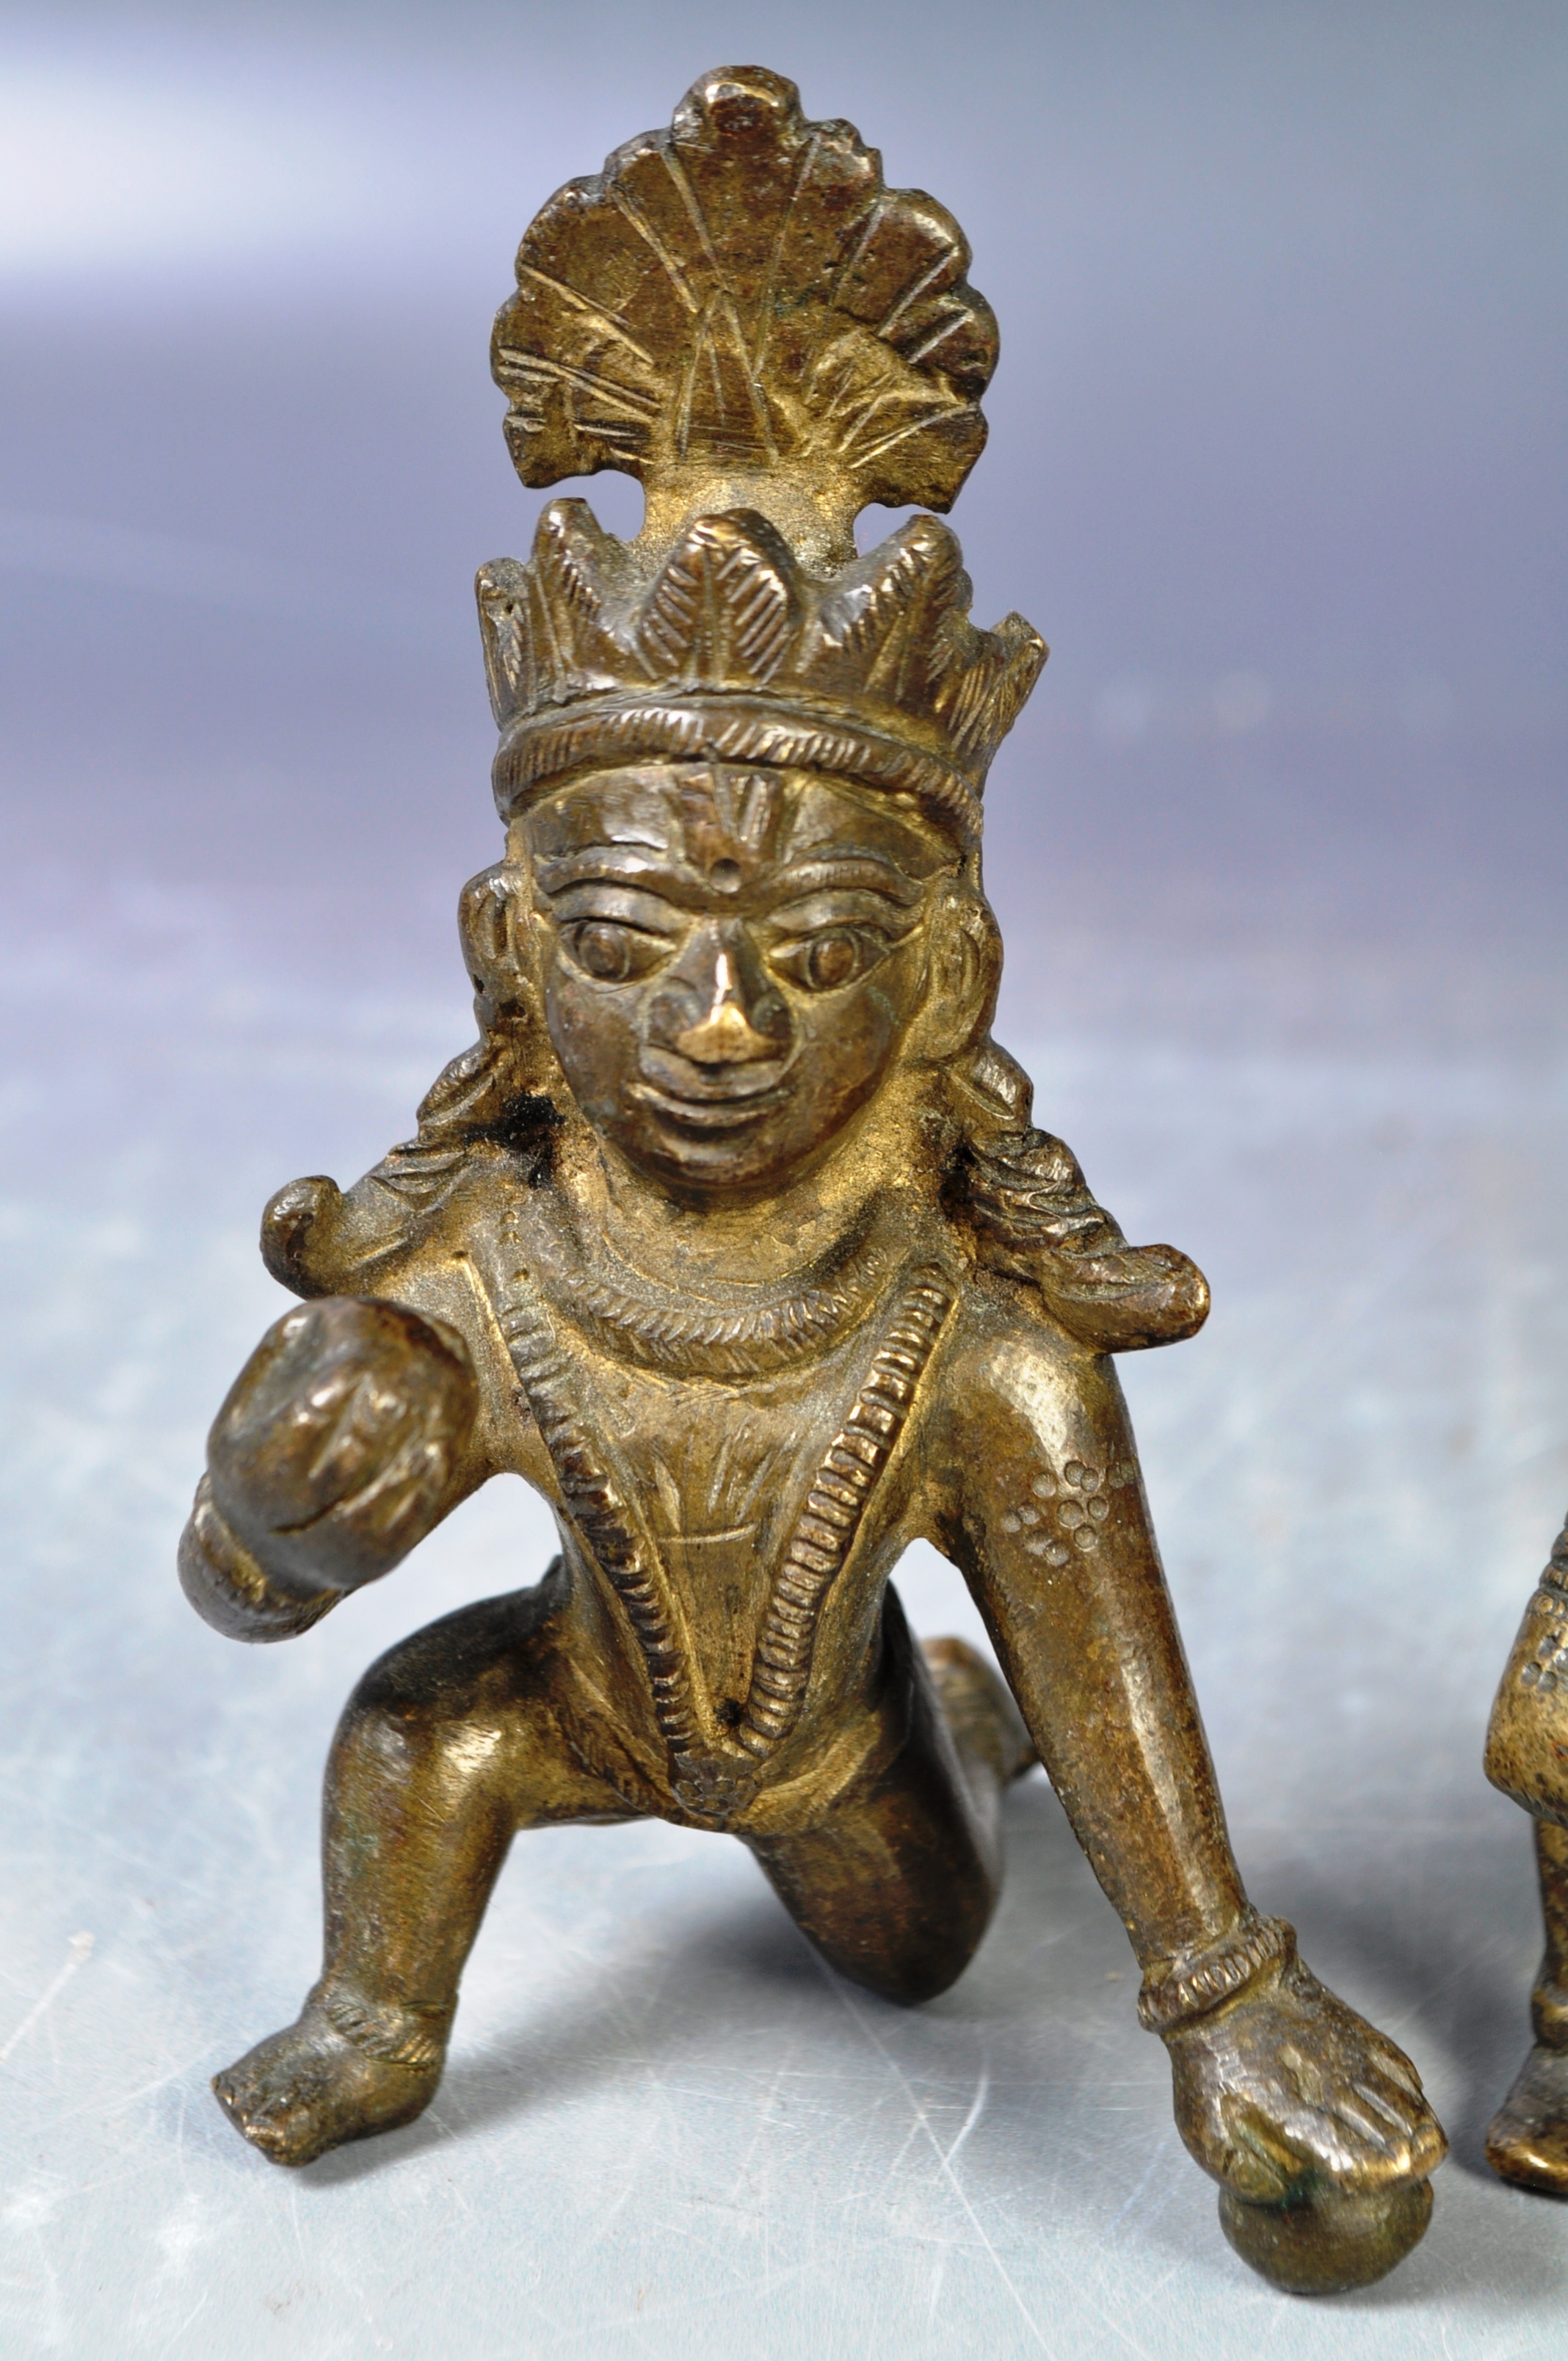 TWO ANTIQUE 19TH / 20TH INDIAN HINDU BRONZE FIGURINES OF KRISHNA - Image 3 of 6